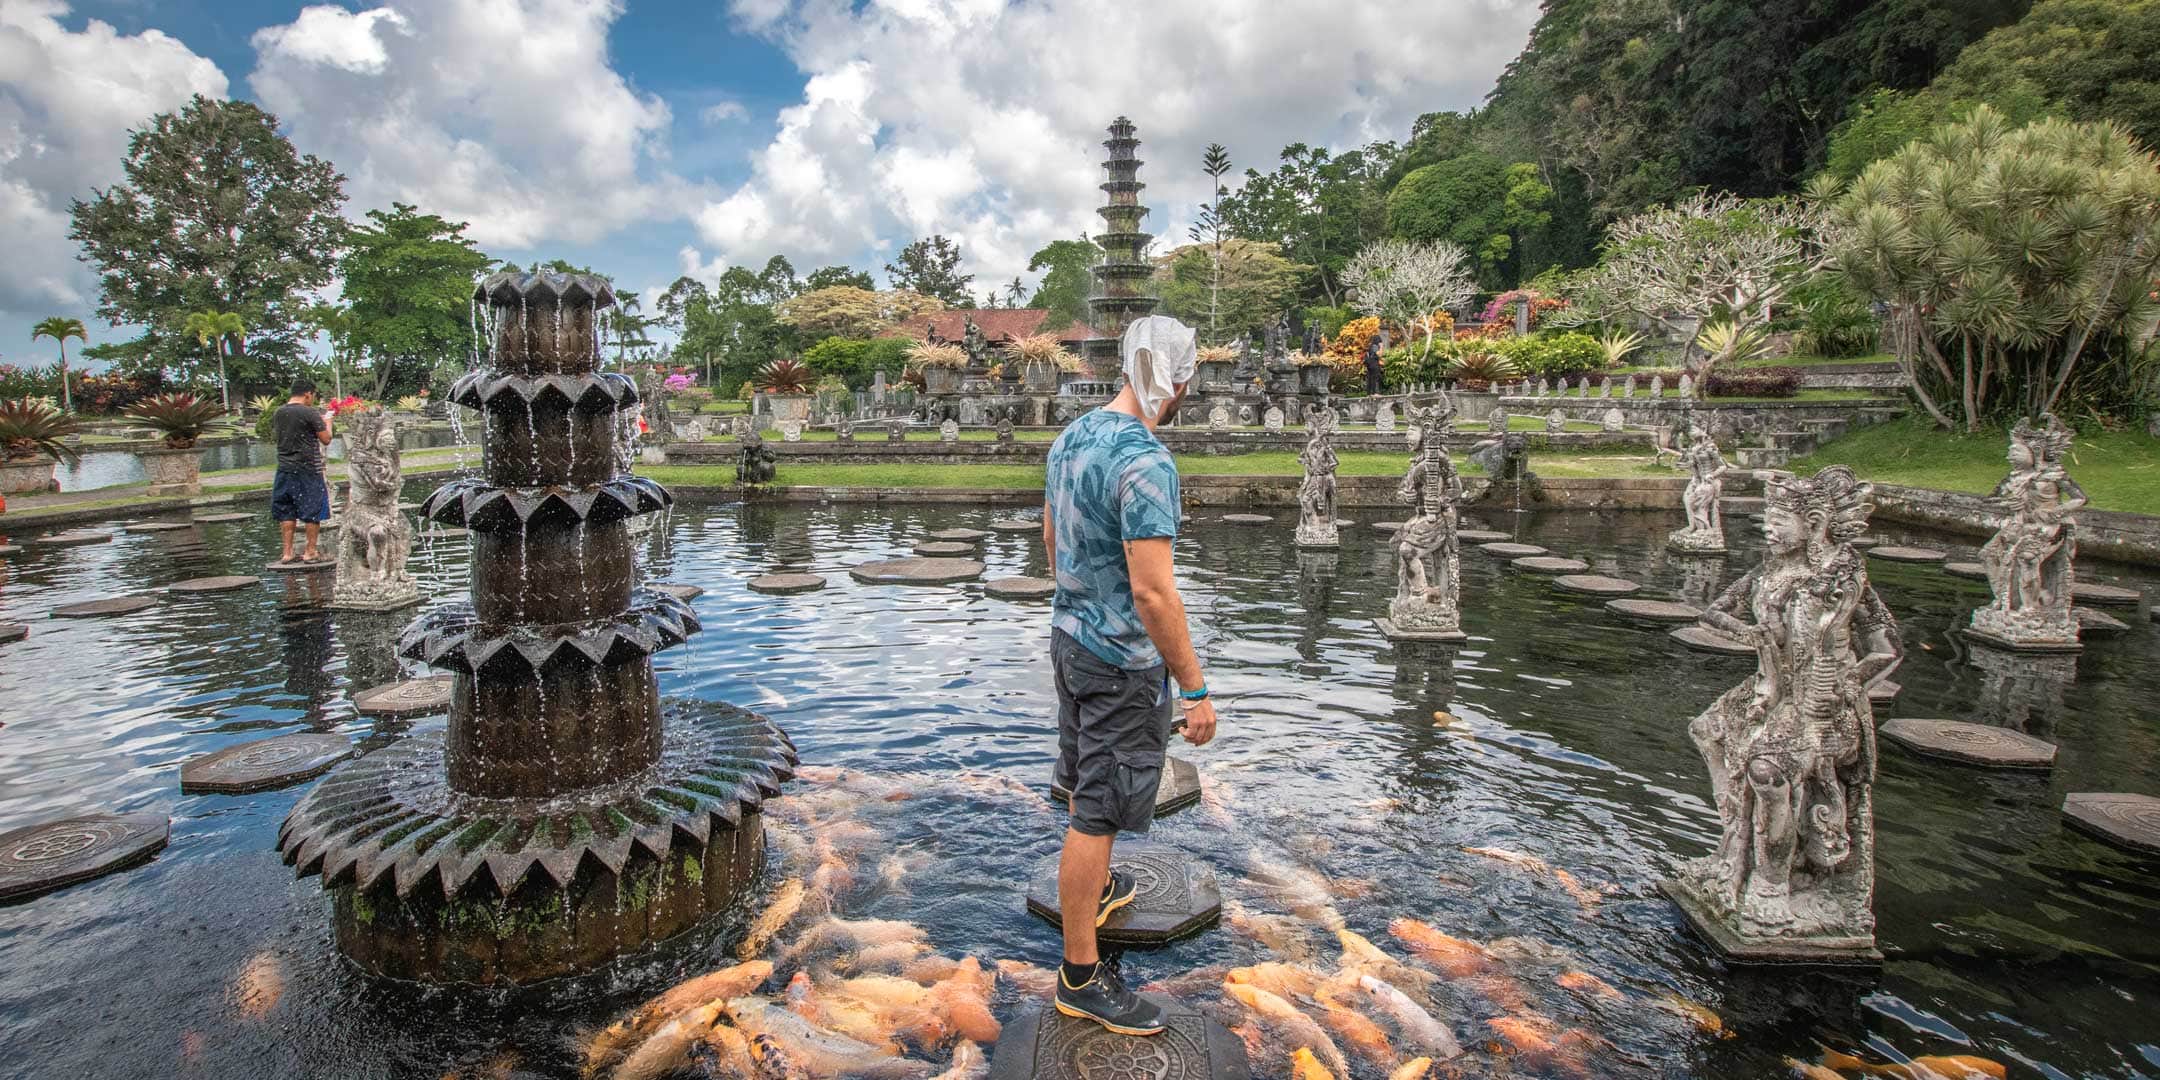 The Most Magical Bali Bucket List